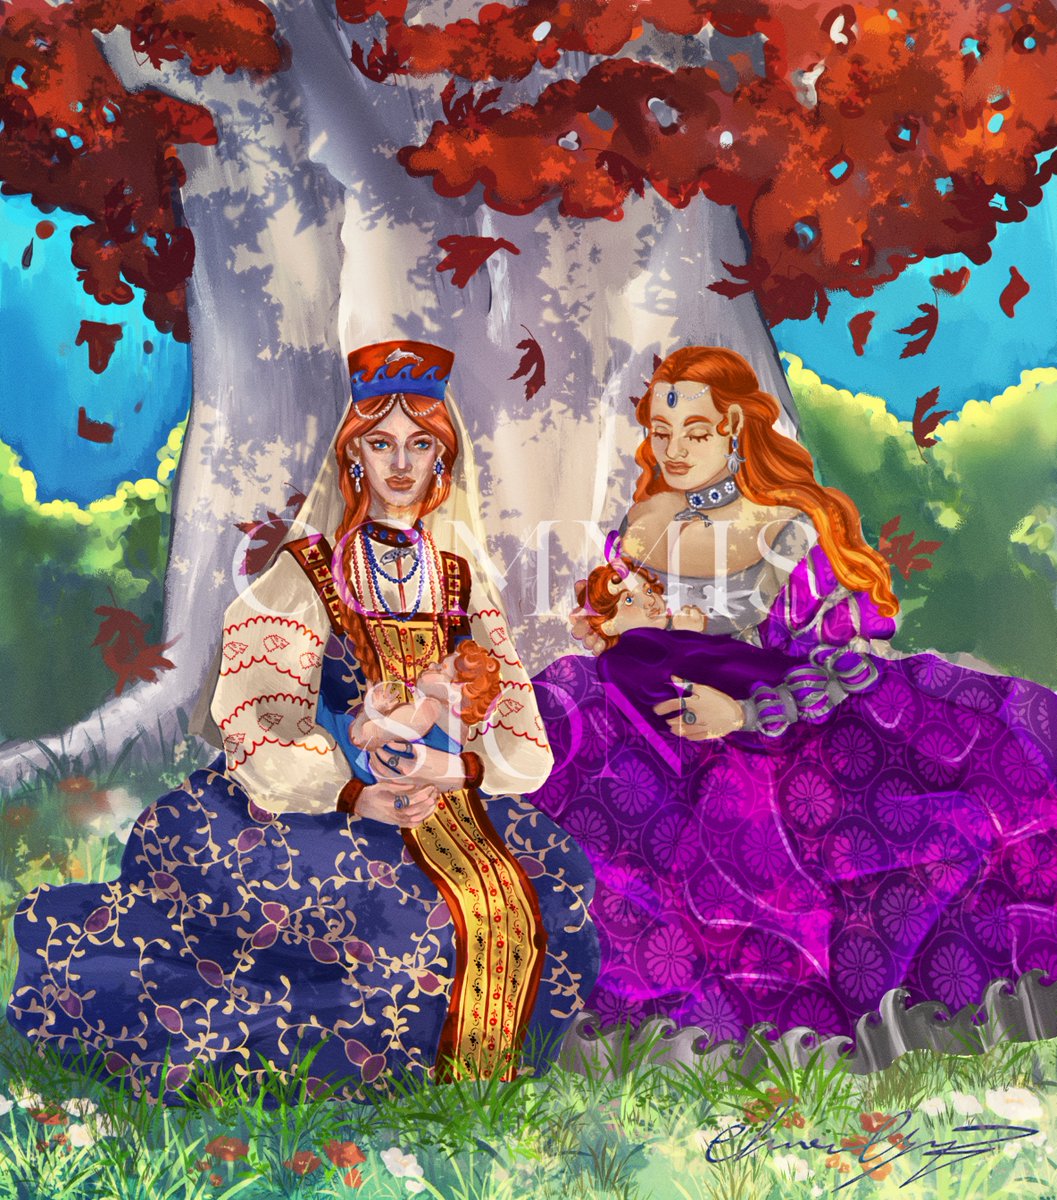 Catelyn Stark and her sister Celia Mallister with Robert and Aemerie
commissionated by @weirwooddream for her fic, The Ichor within our Pyre on Ao3
#catelynstark #celiamallister #celiatully #oc #housetully #riverlands #commission #robbstark #asoiaf #fanfic #fanart #illustration